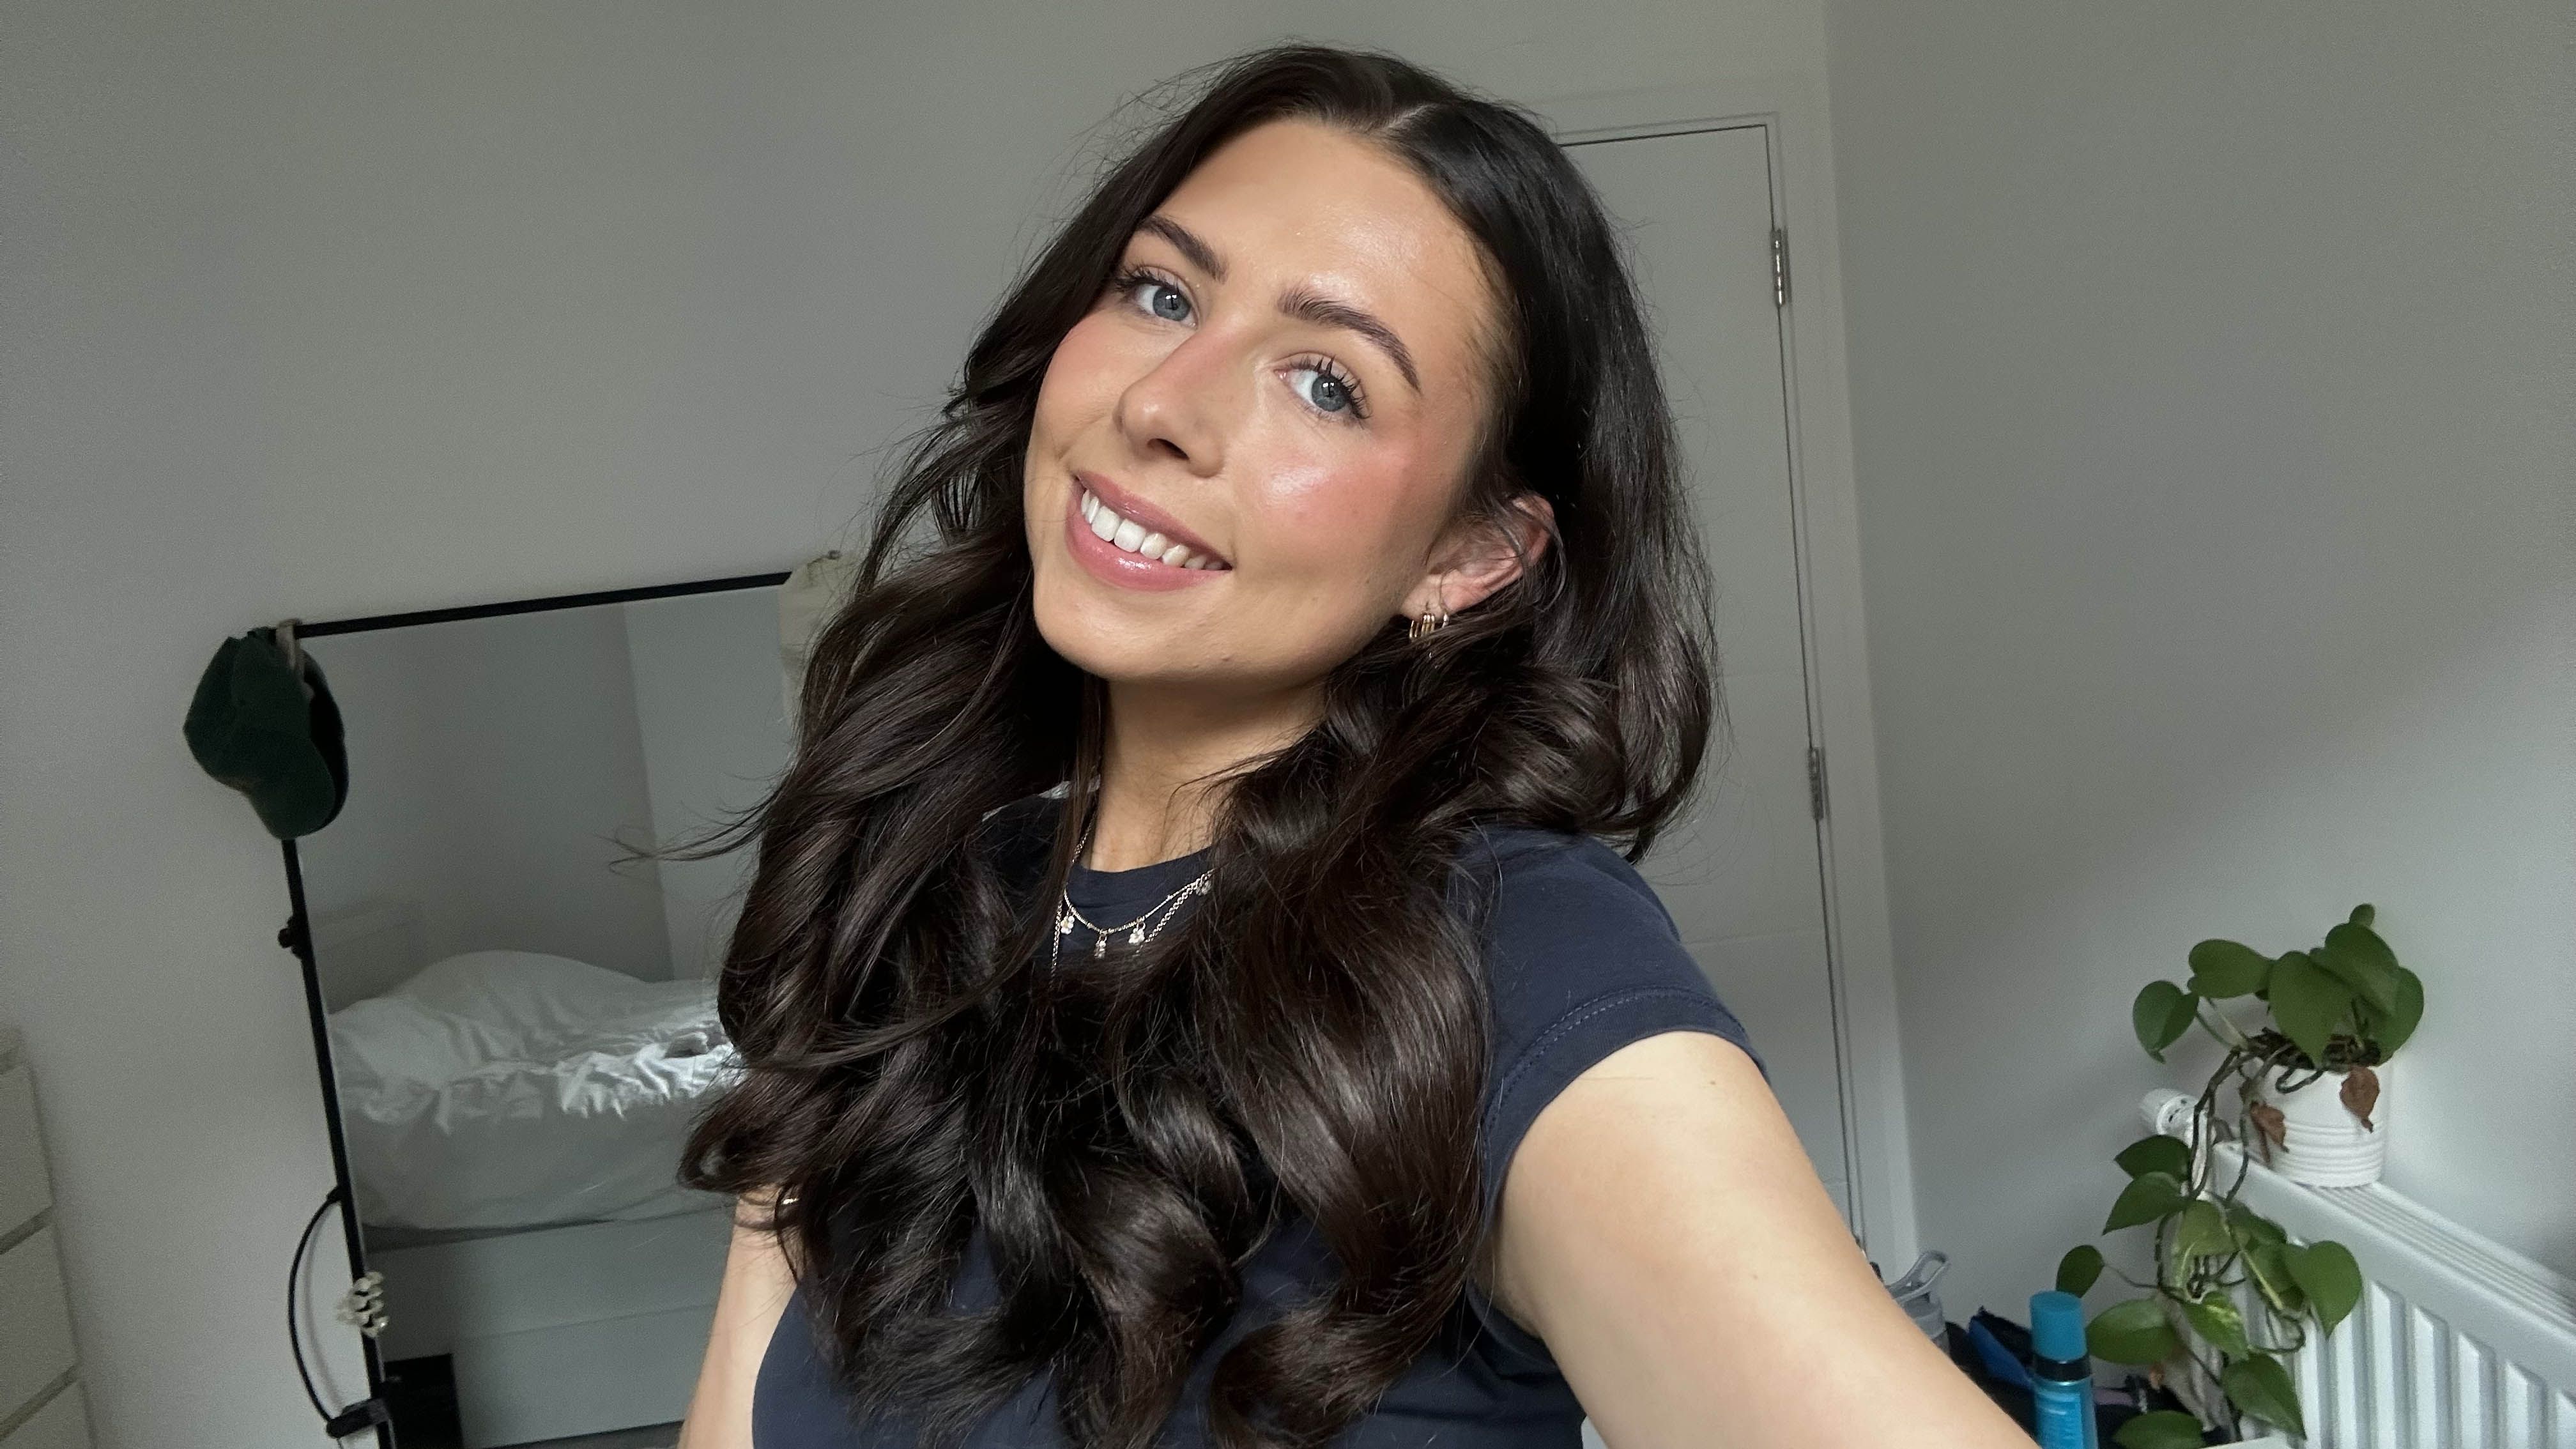 Heatless Hair Ribbon Review: We Tried the Heatless Curler All Over TikTok